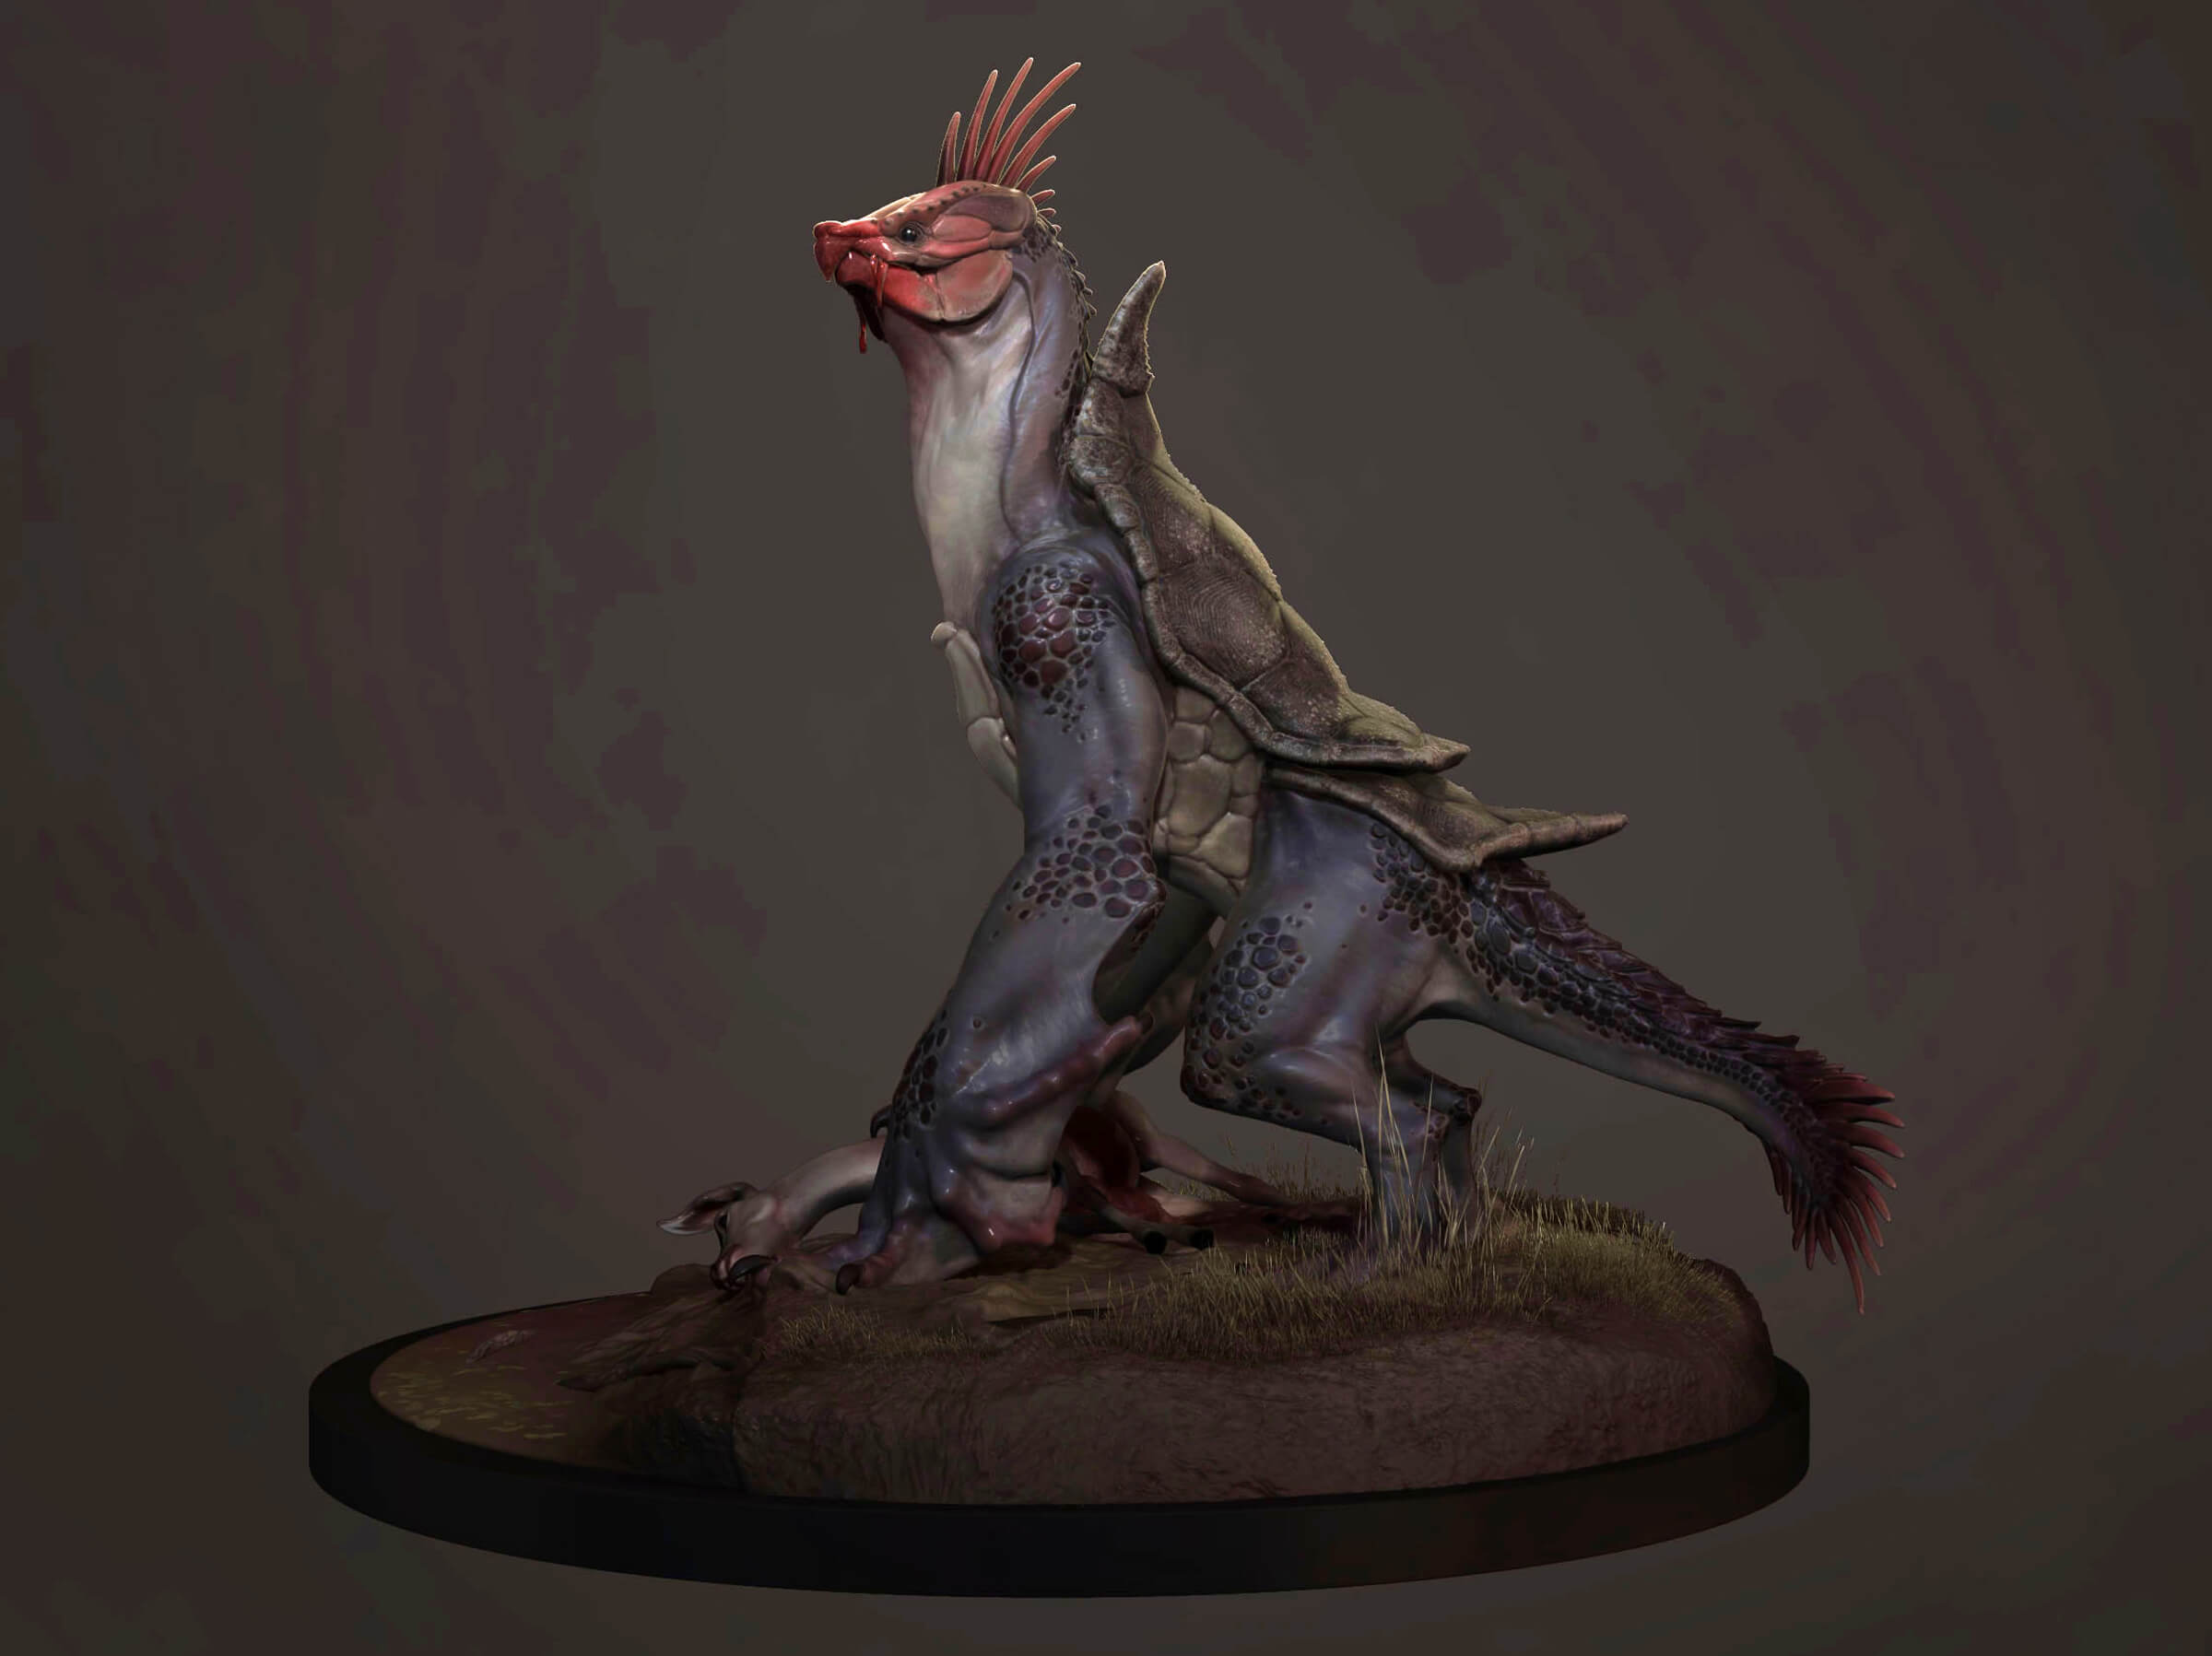 computer-generated 3D model of an animal that looks like a cross between a rooster and a lizard